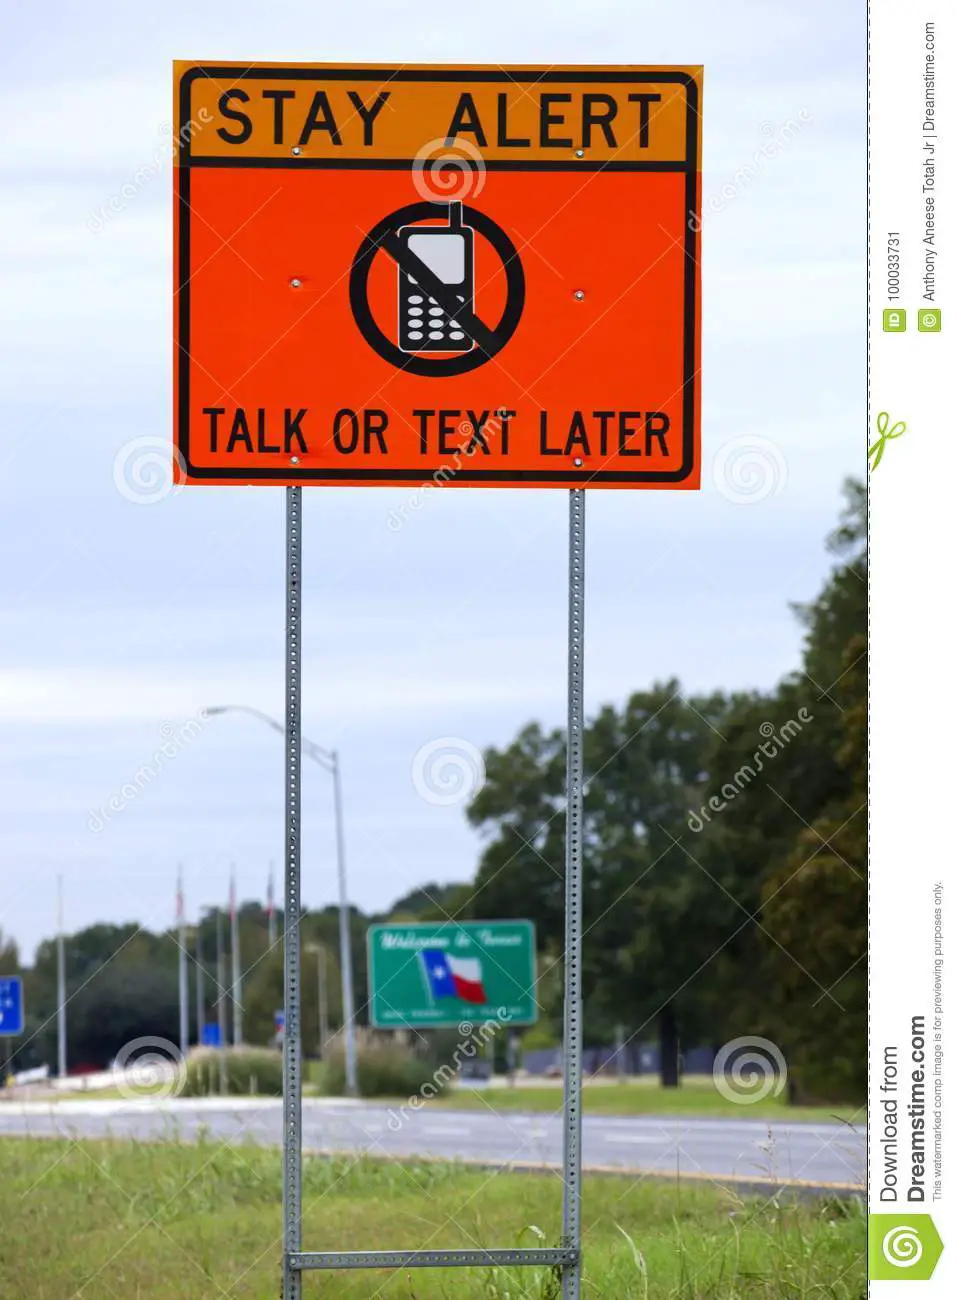 Texas Road Sign Warning About Cellphones Stock Image ...